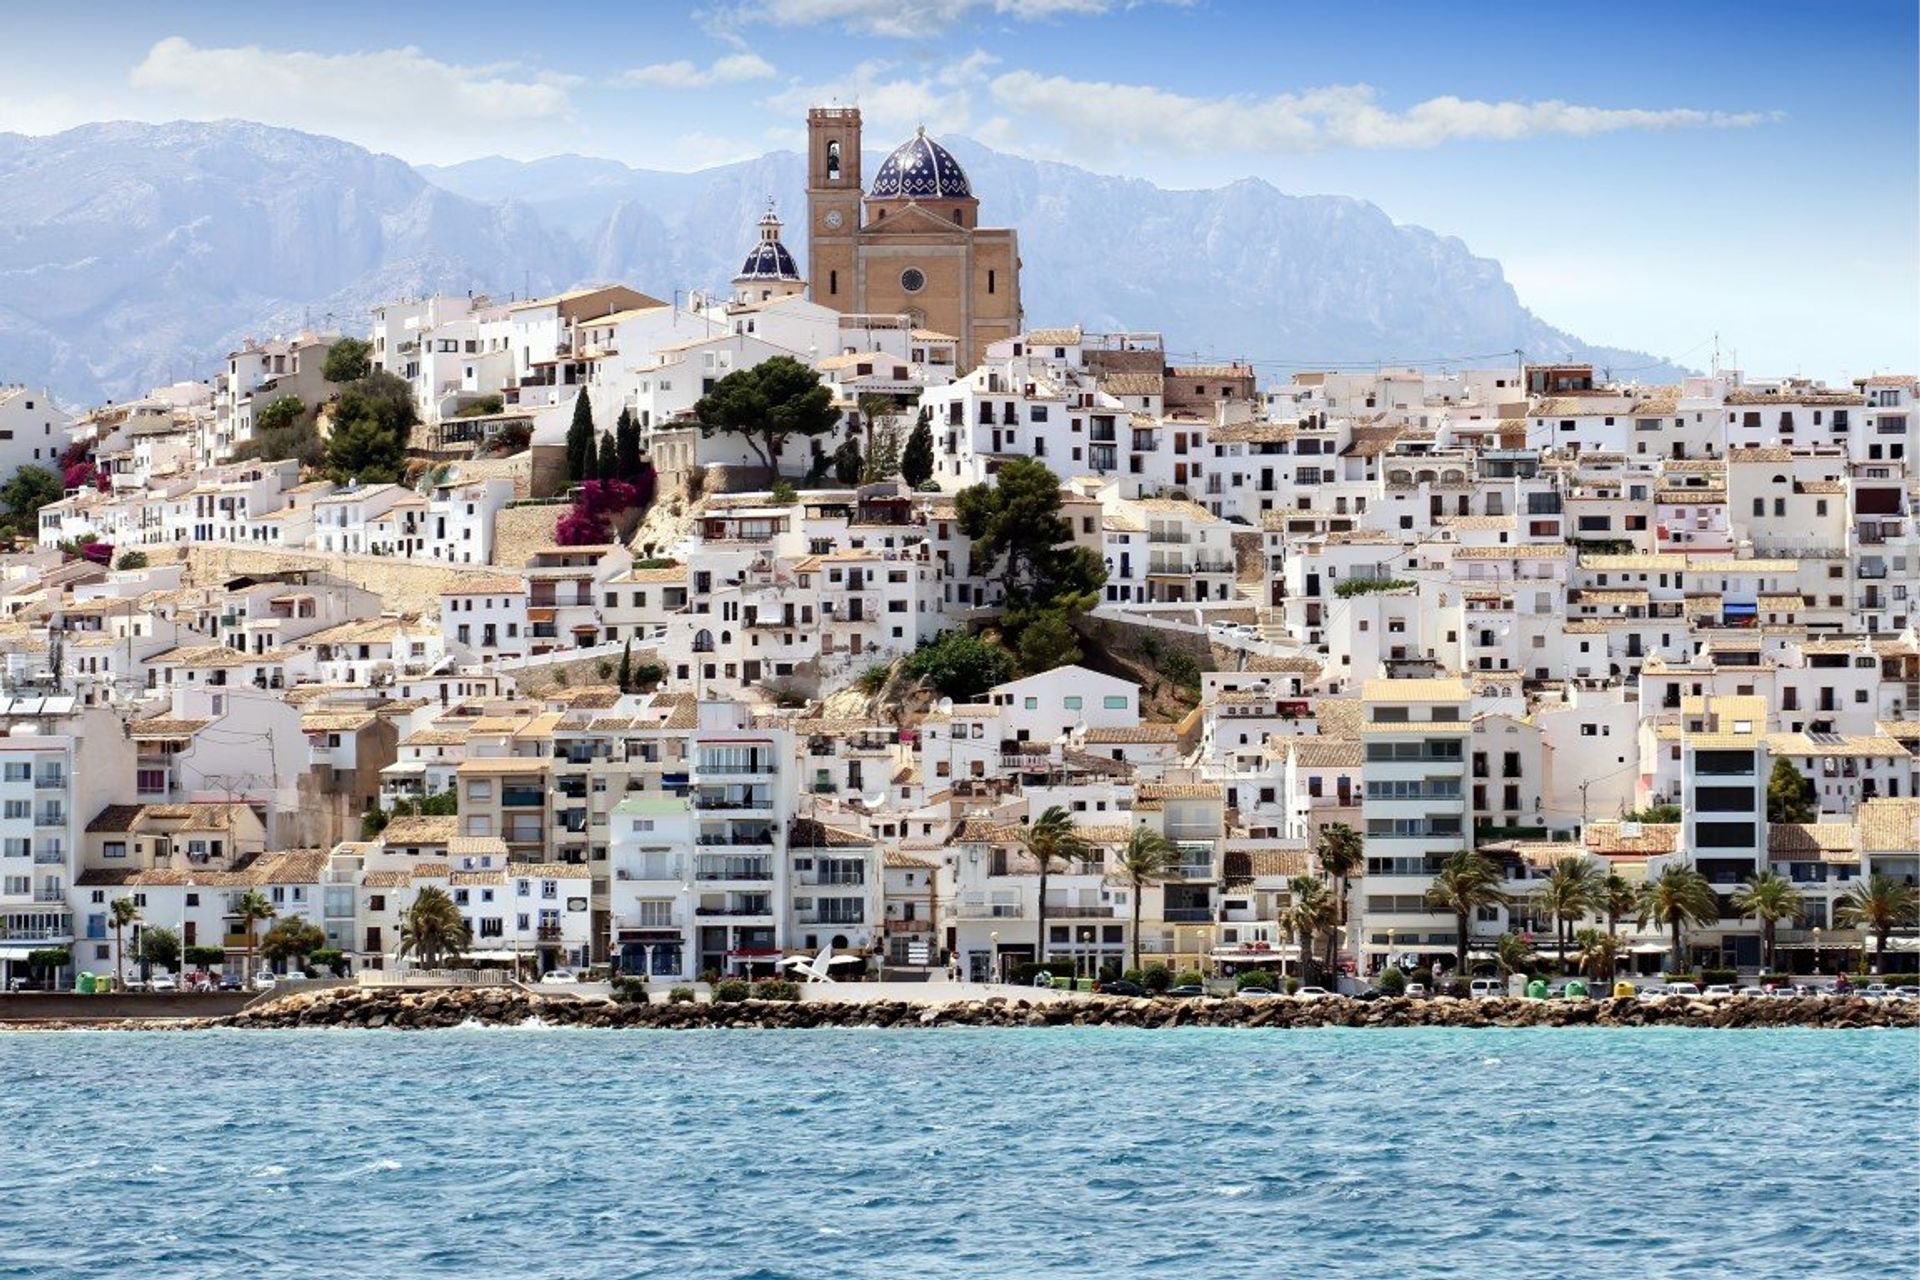 Altea's iconic old town, El Fornet, with its blue domed church is one of the most visited in the Canaries